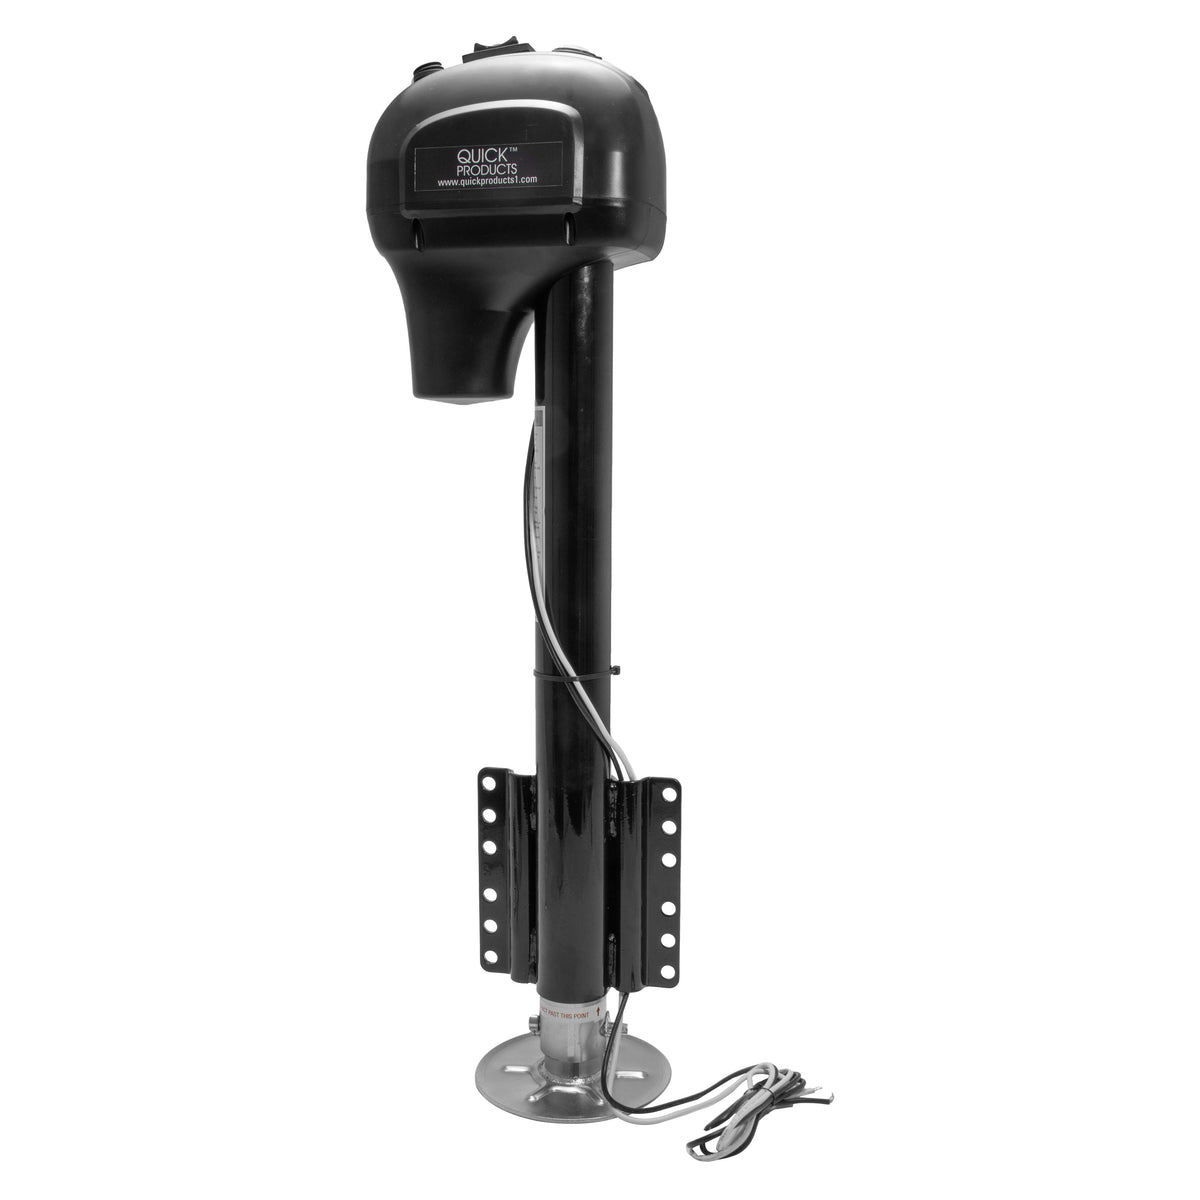 Quick Products JQ-3500SMB Power A-Frame Electric Tongue Jack with Side-Mount, LED Work Light and Permanent Ground Wiring for Camper Trailer, RV - 3,650 lbs. Capacity (Higher then Standard 3,500 lbs. Jack!), Black